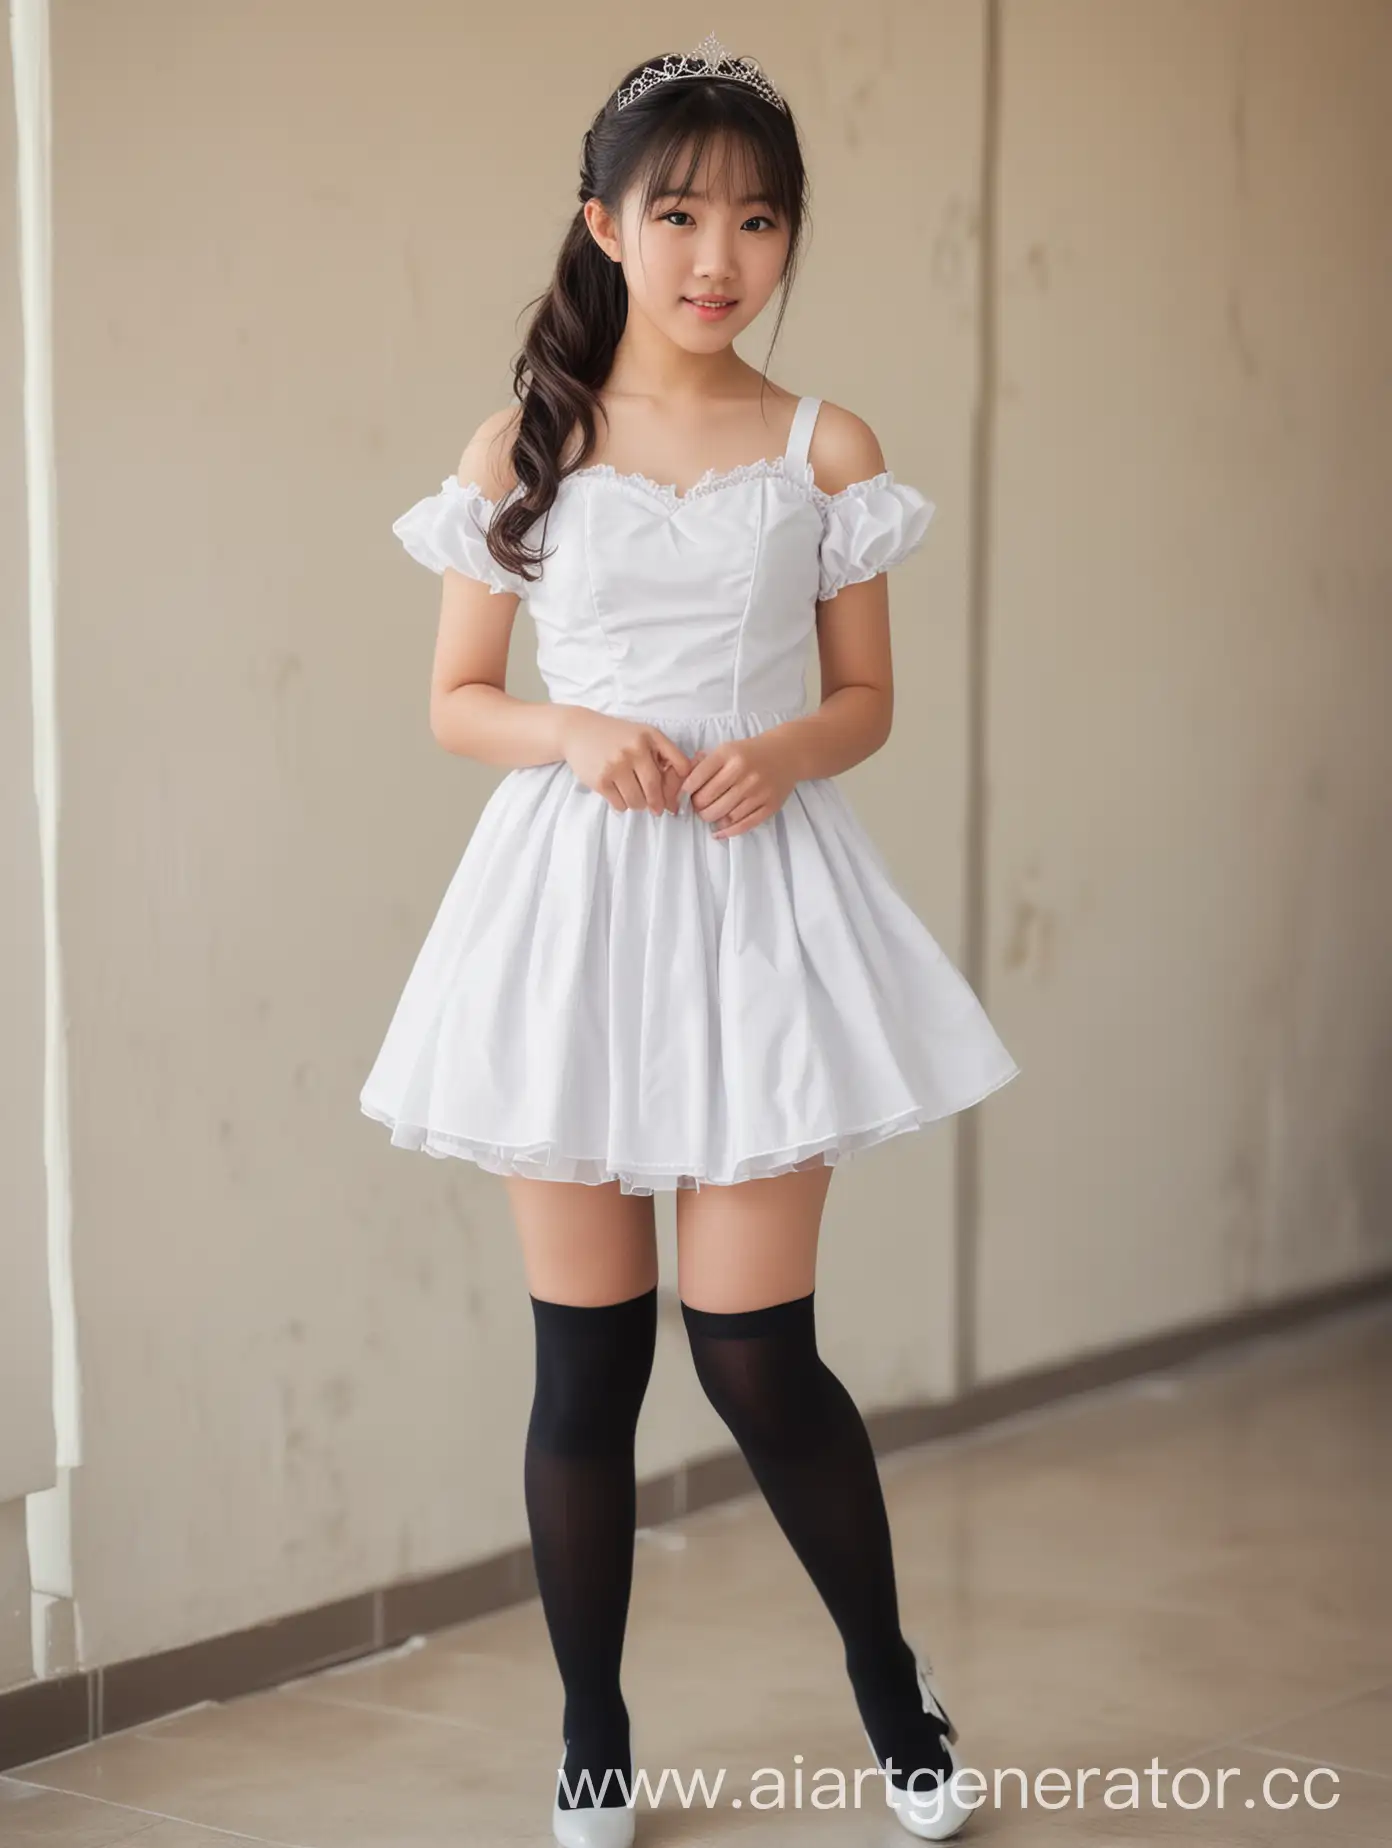 Asian-Middle-School-Student-in-Princess-Dress-and-High-Heels